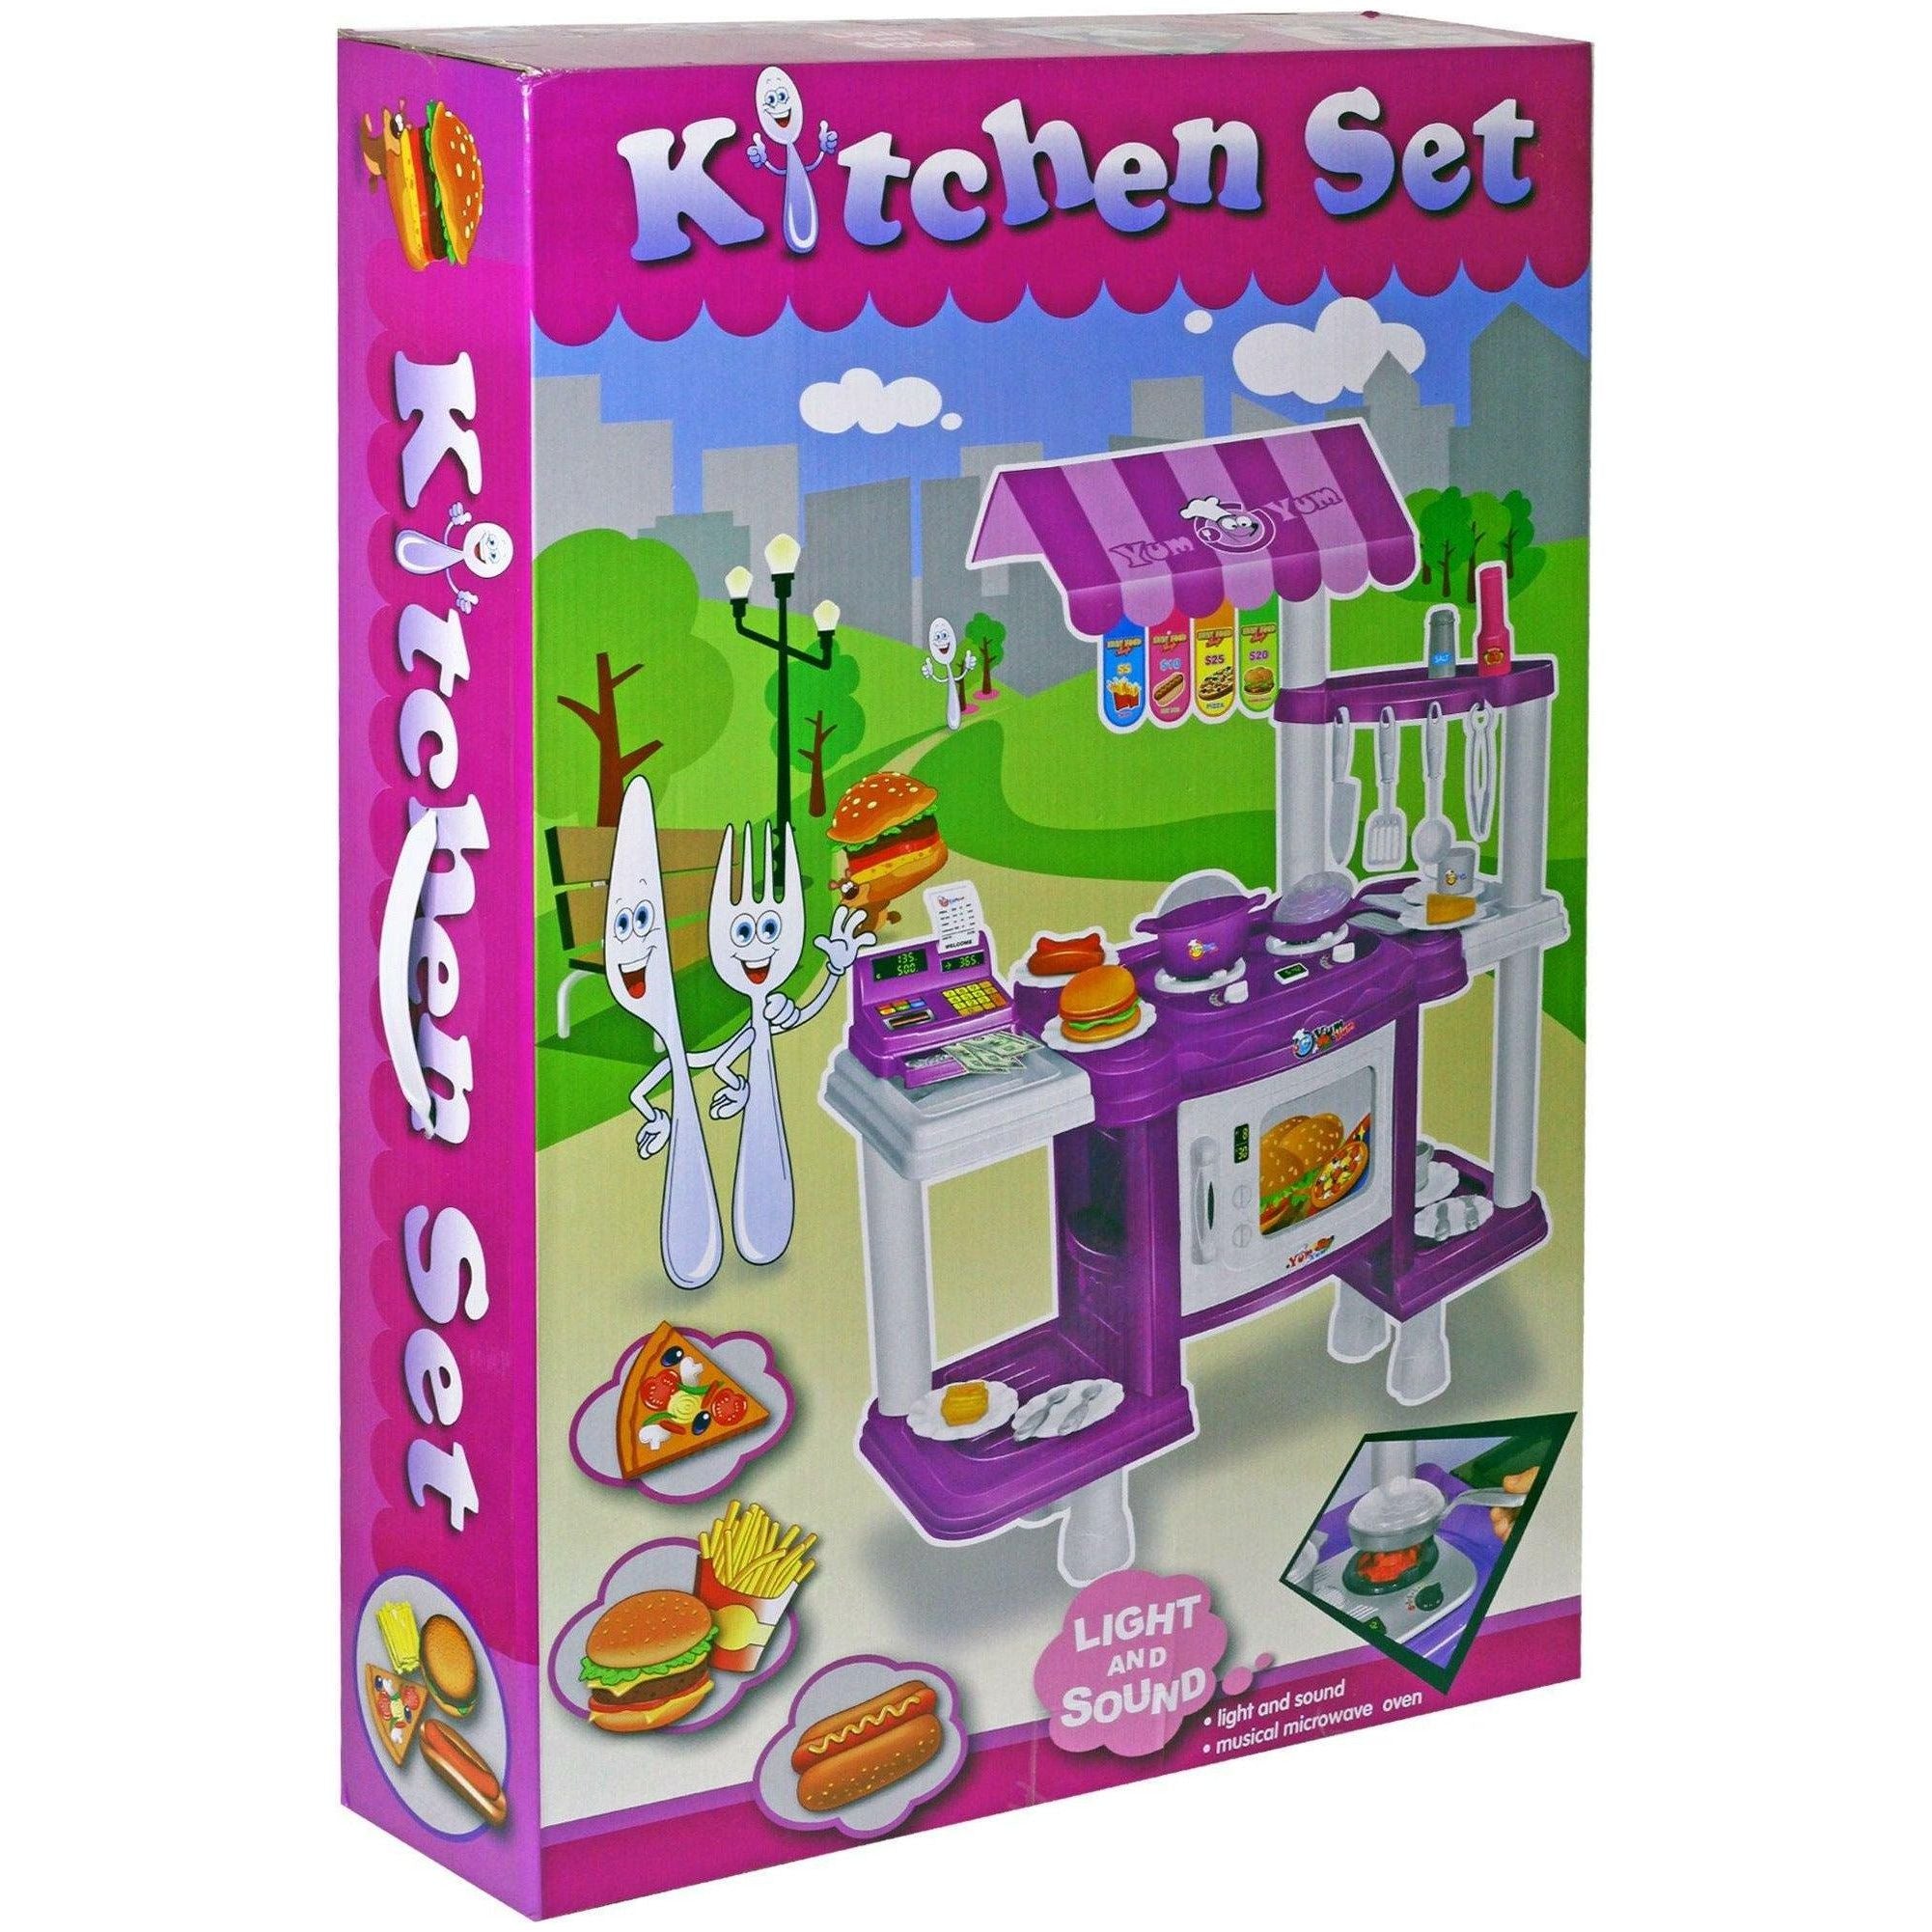 Fast Food kitchen Cooking Play Set - BumbleToys - 5-7 Years, Girls, Kitchen & Play Sets, Toy House